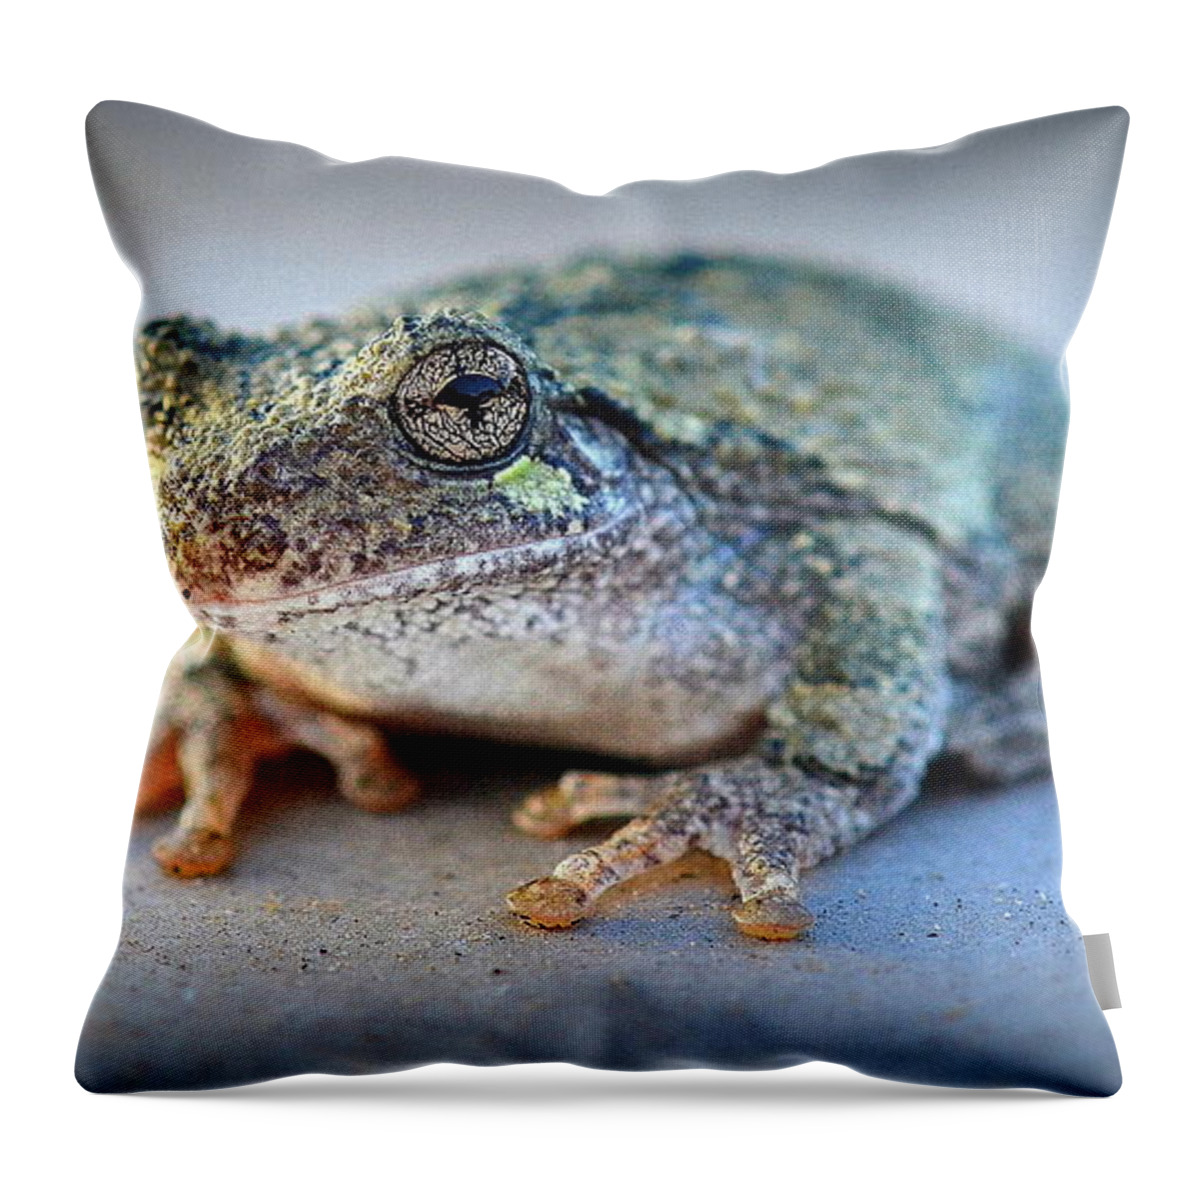 Frog Throw Pillow featuring the photograph Here's Looking At You by Andrea Platt